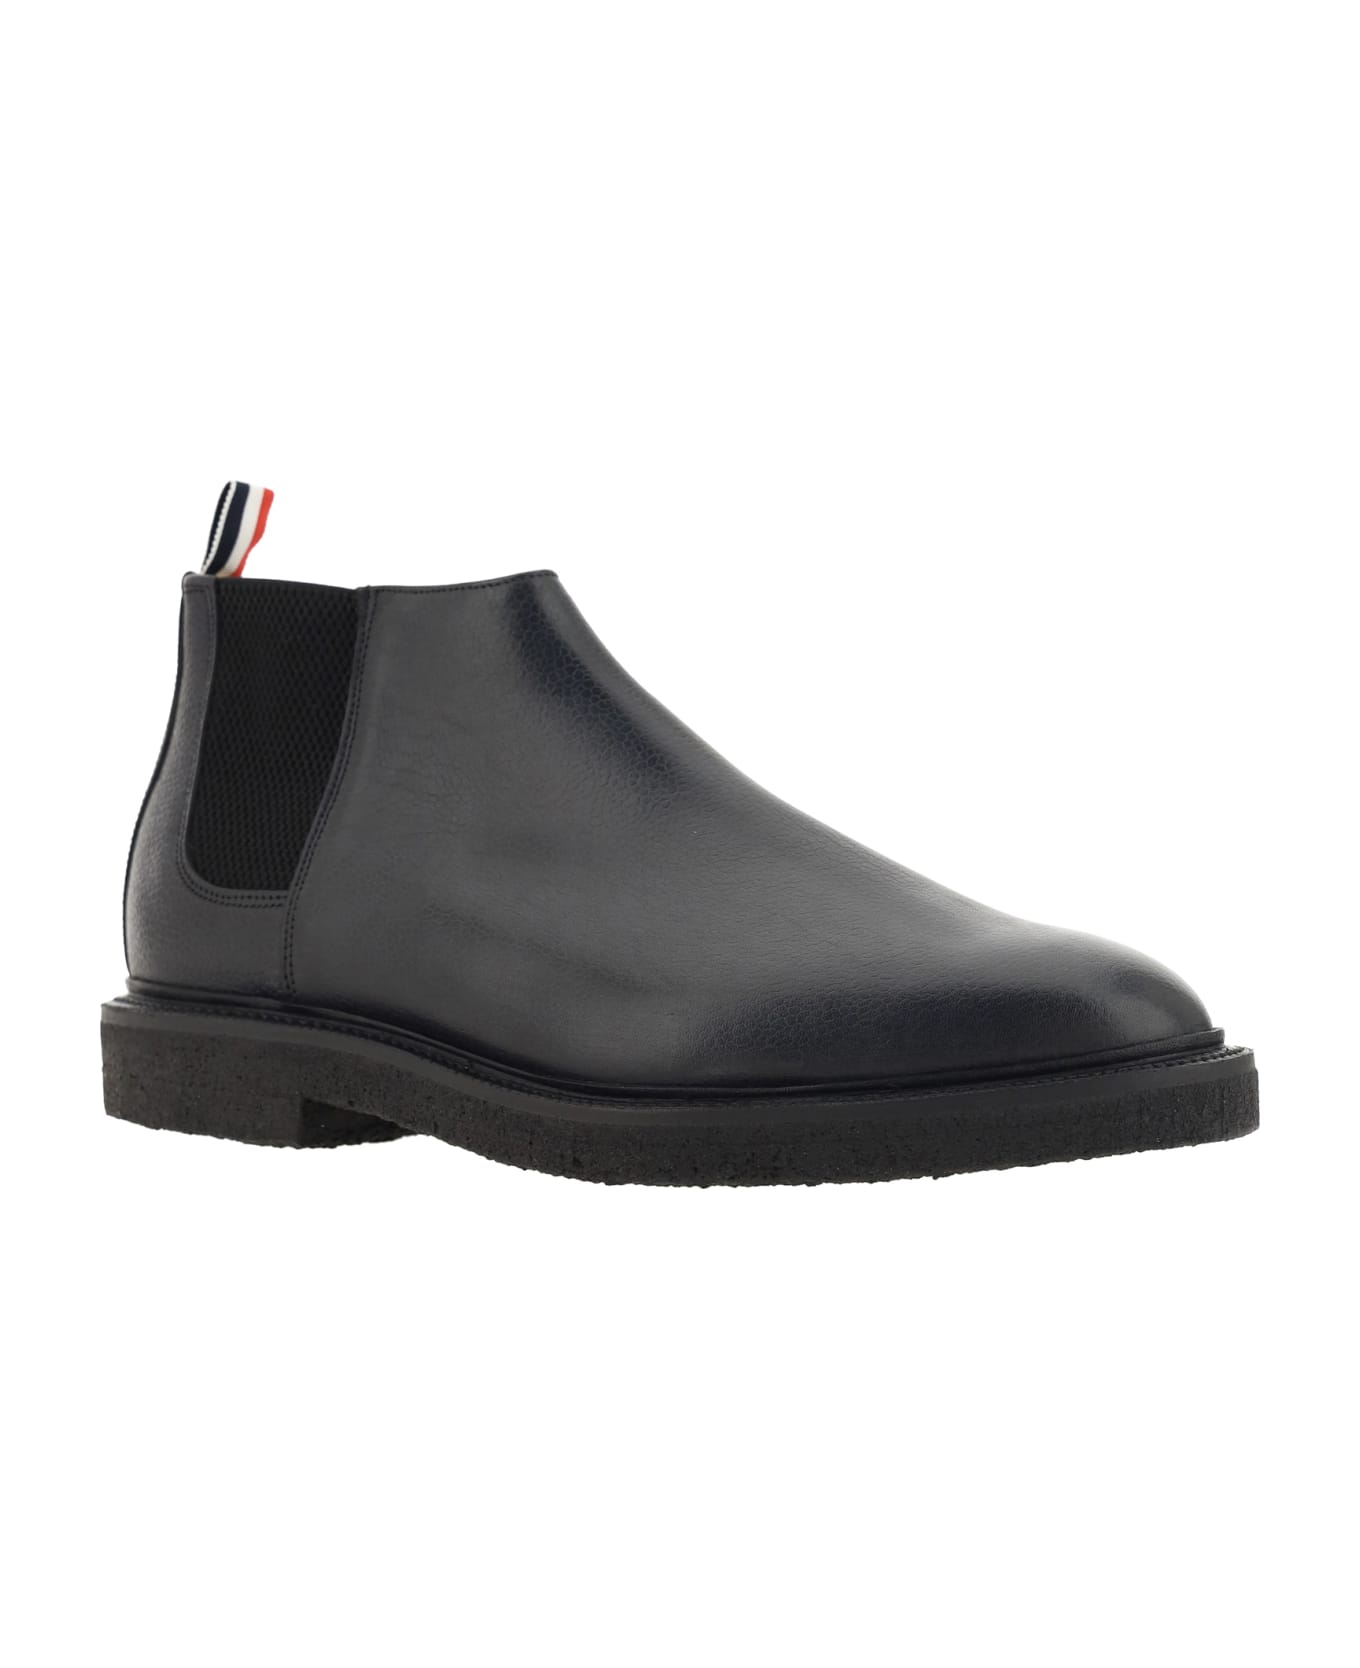 Thom Browne Ankle Boots - Black ブーツ